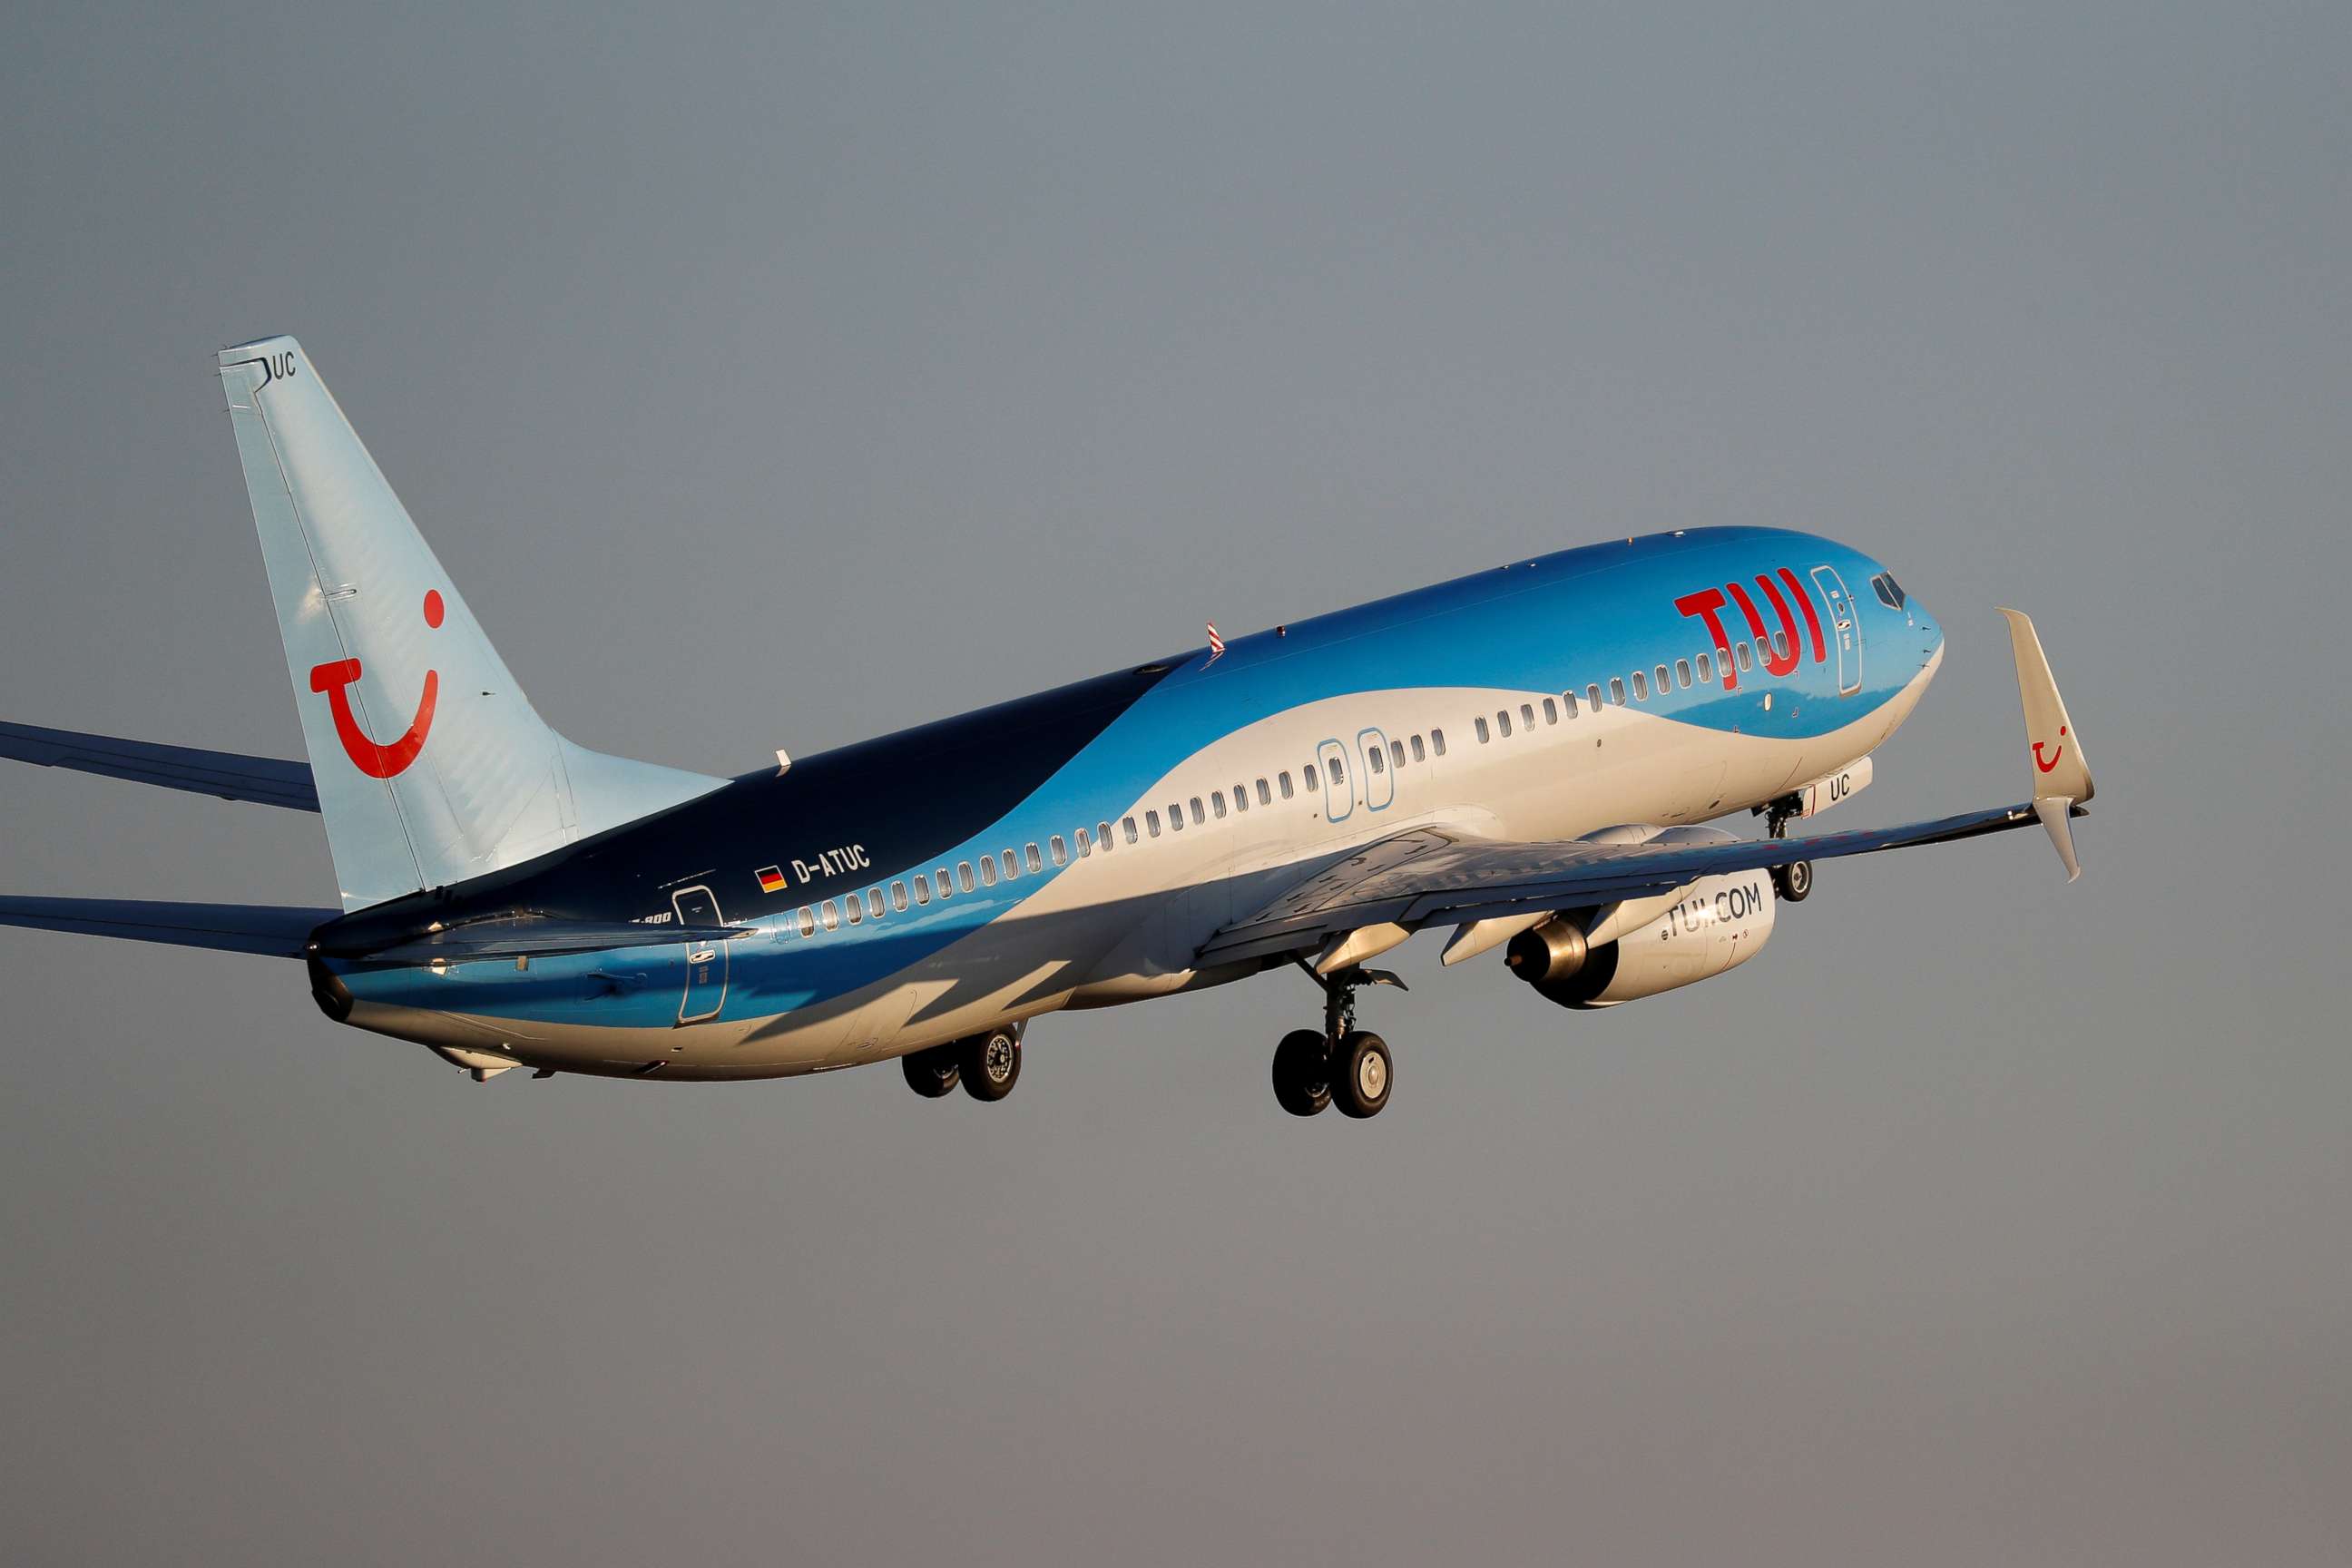 FILE PHOTO: A TUI Boeing 737-800 plane takes off from the airport in Palma de Mallorca, Spain, July 29, 2018.